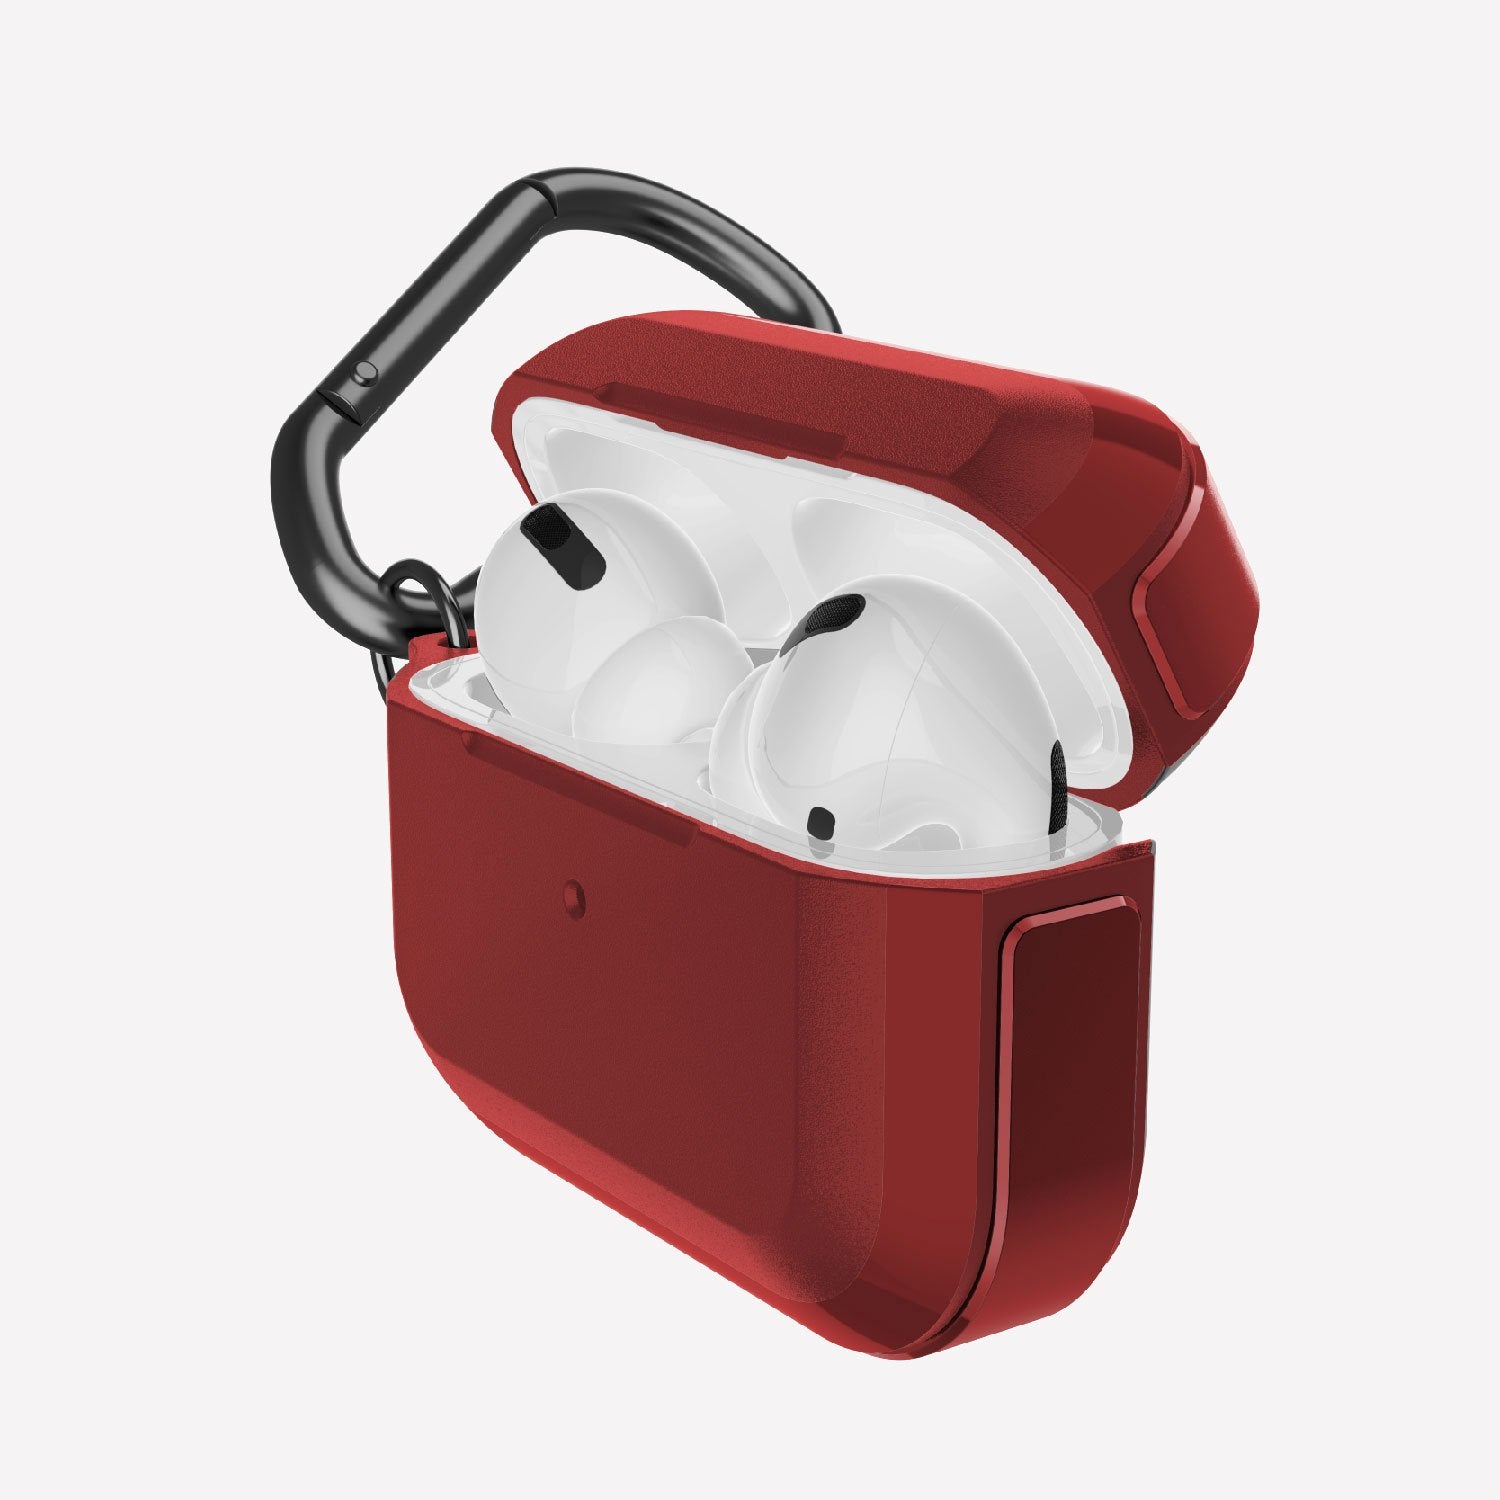 Raptic Trek Red on Apple AirPods Pro showing the sideview, hard polycarbonate top, machined aluminum bumper and detachable carabiner